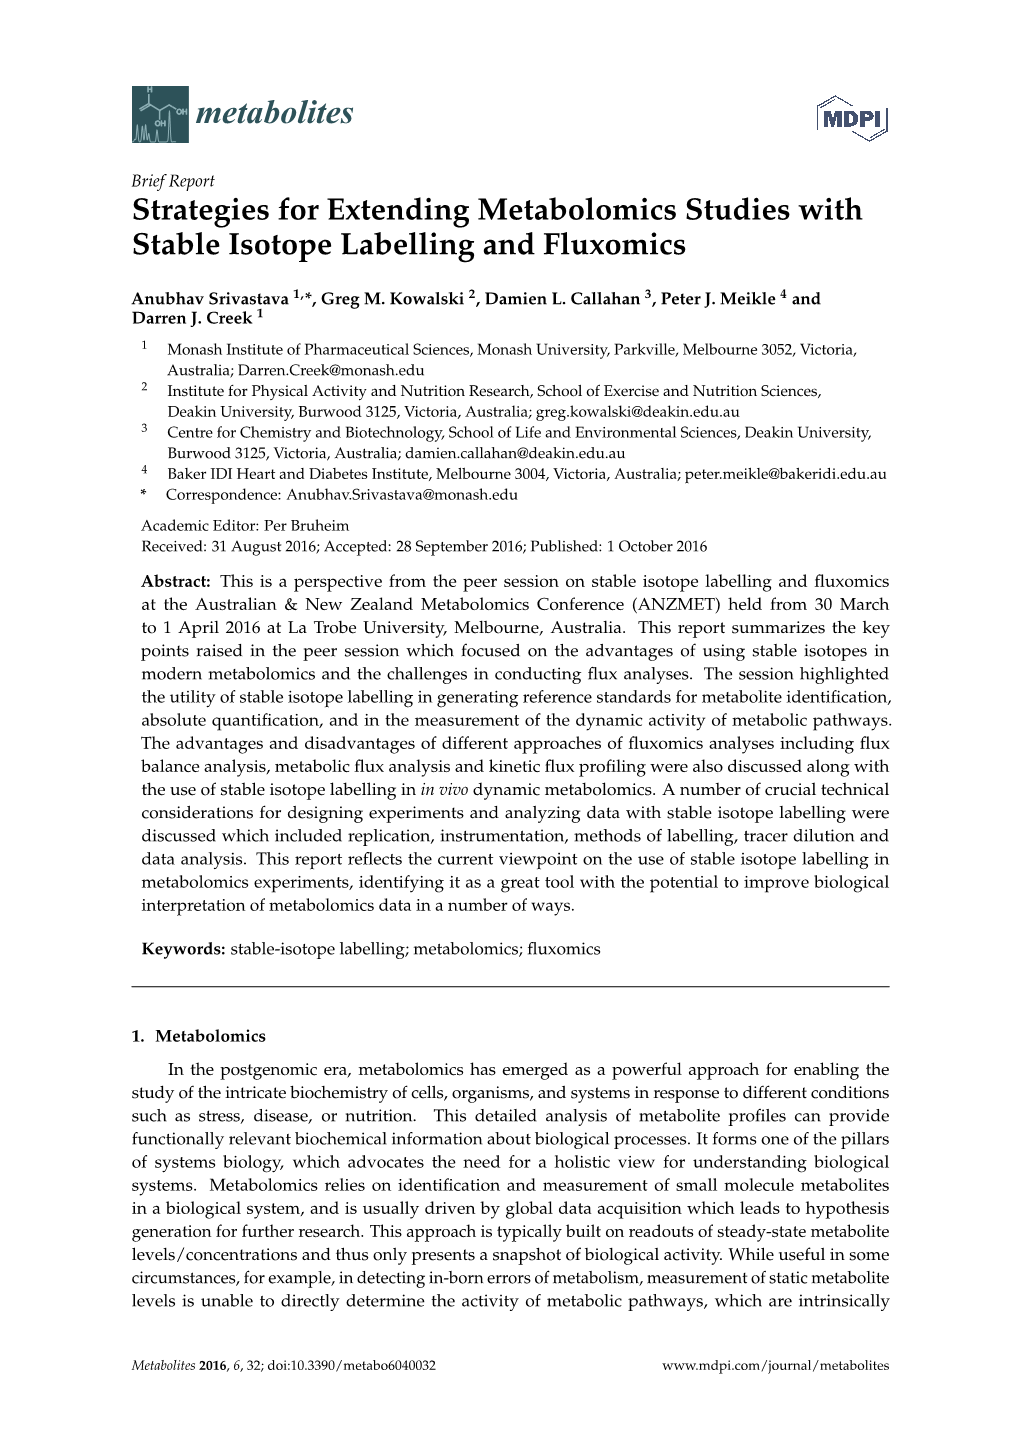 Strategies for Extending Metabolomics Studies with Stable Isotope Labelling and Fluxomics